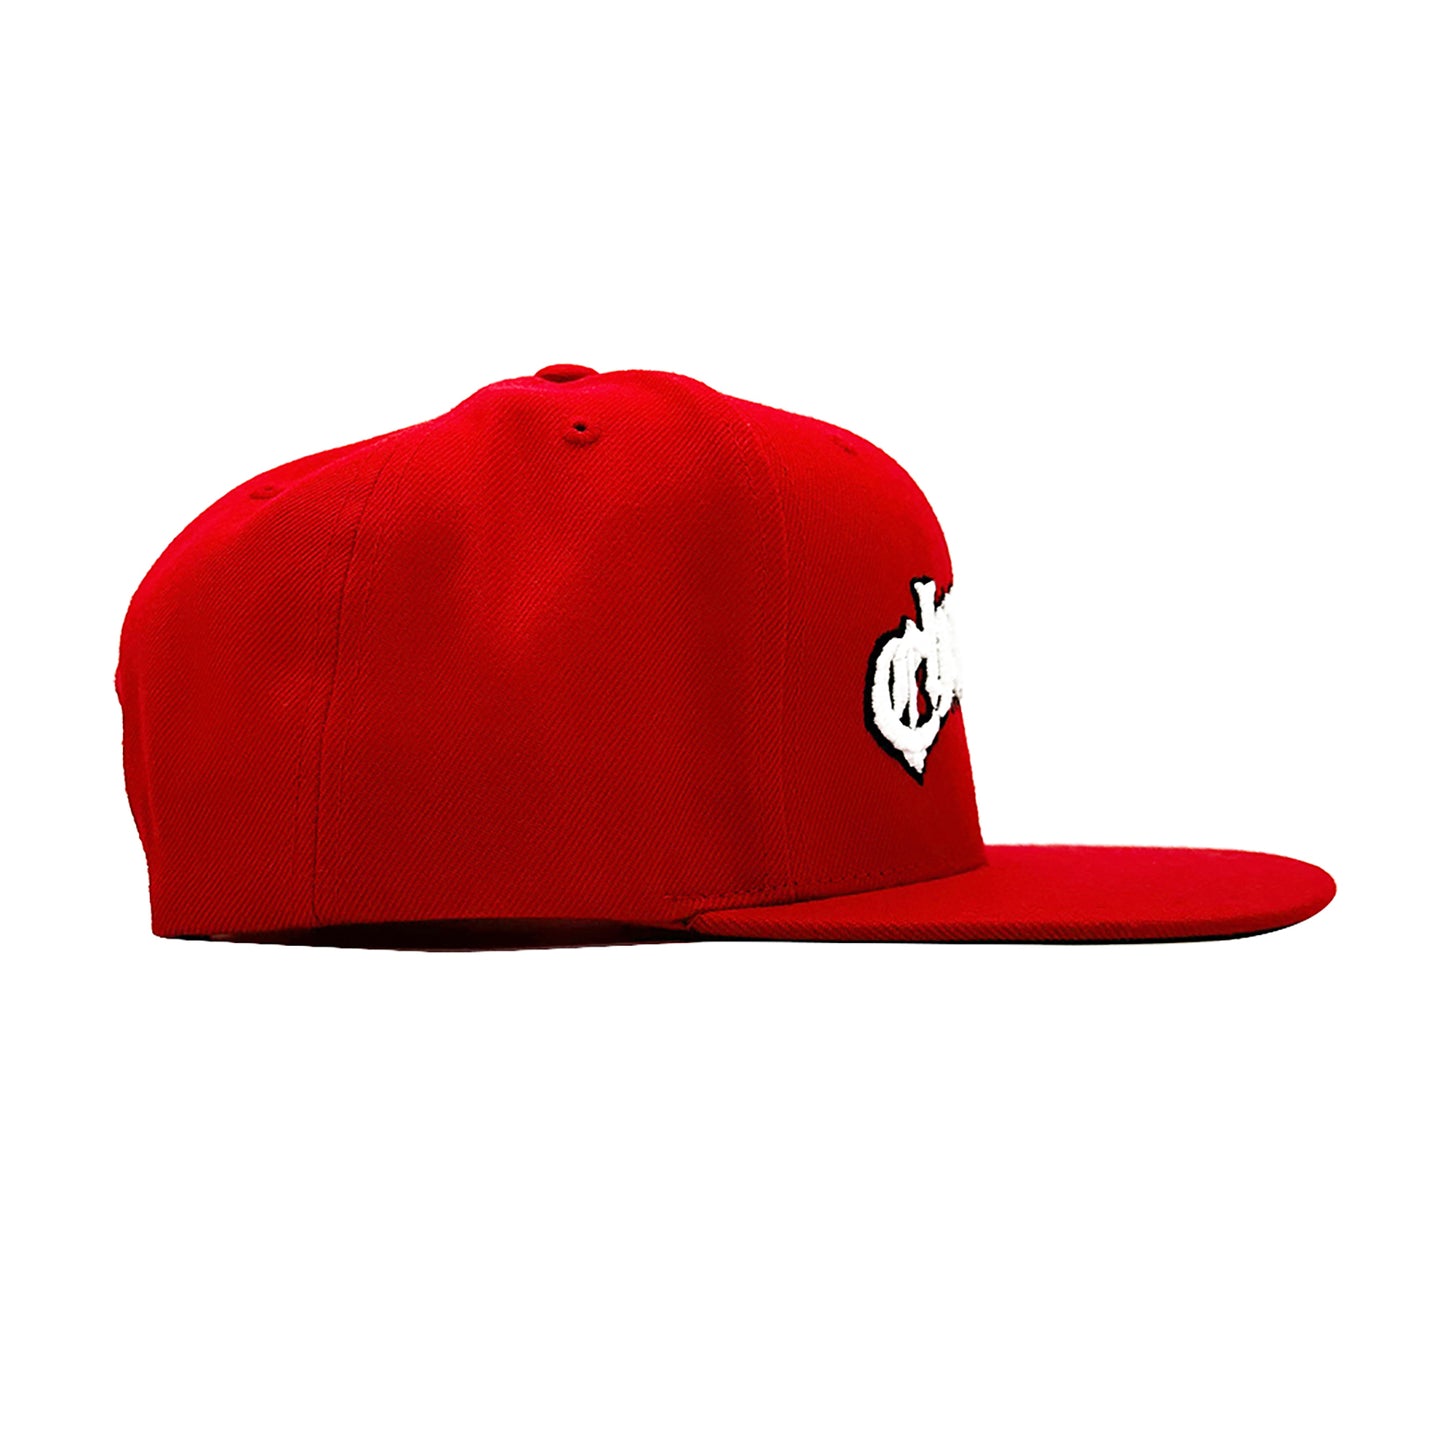 Chapter 17 text logo - Snapback - 2023 - Red